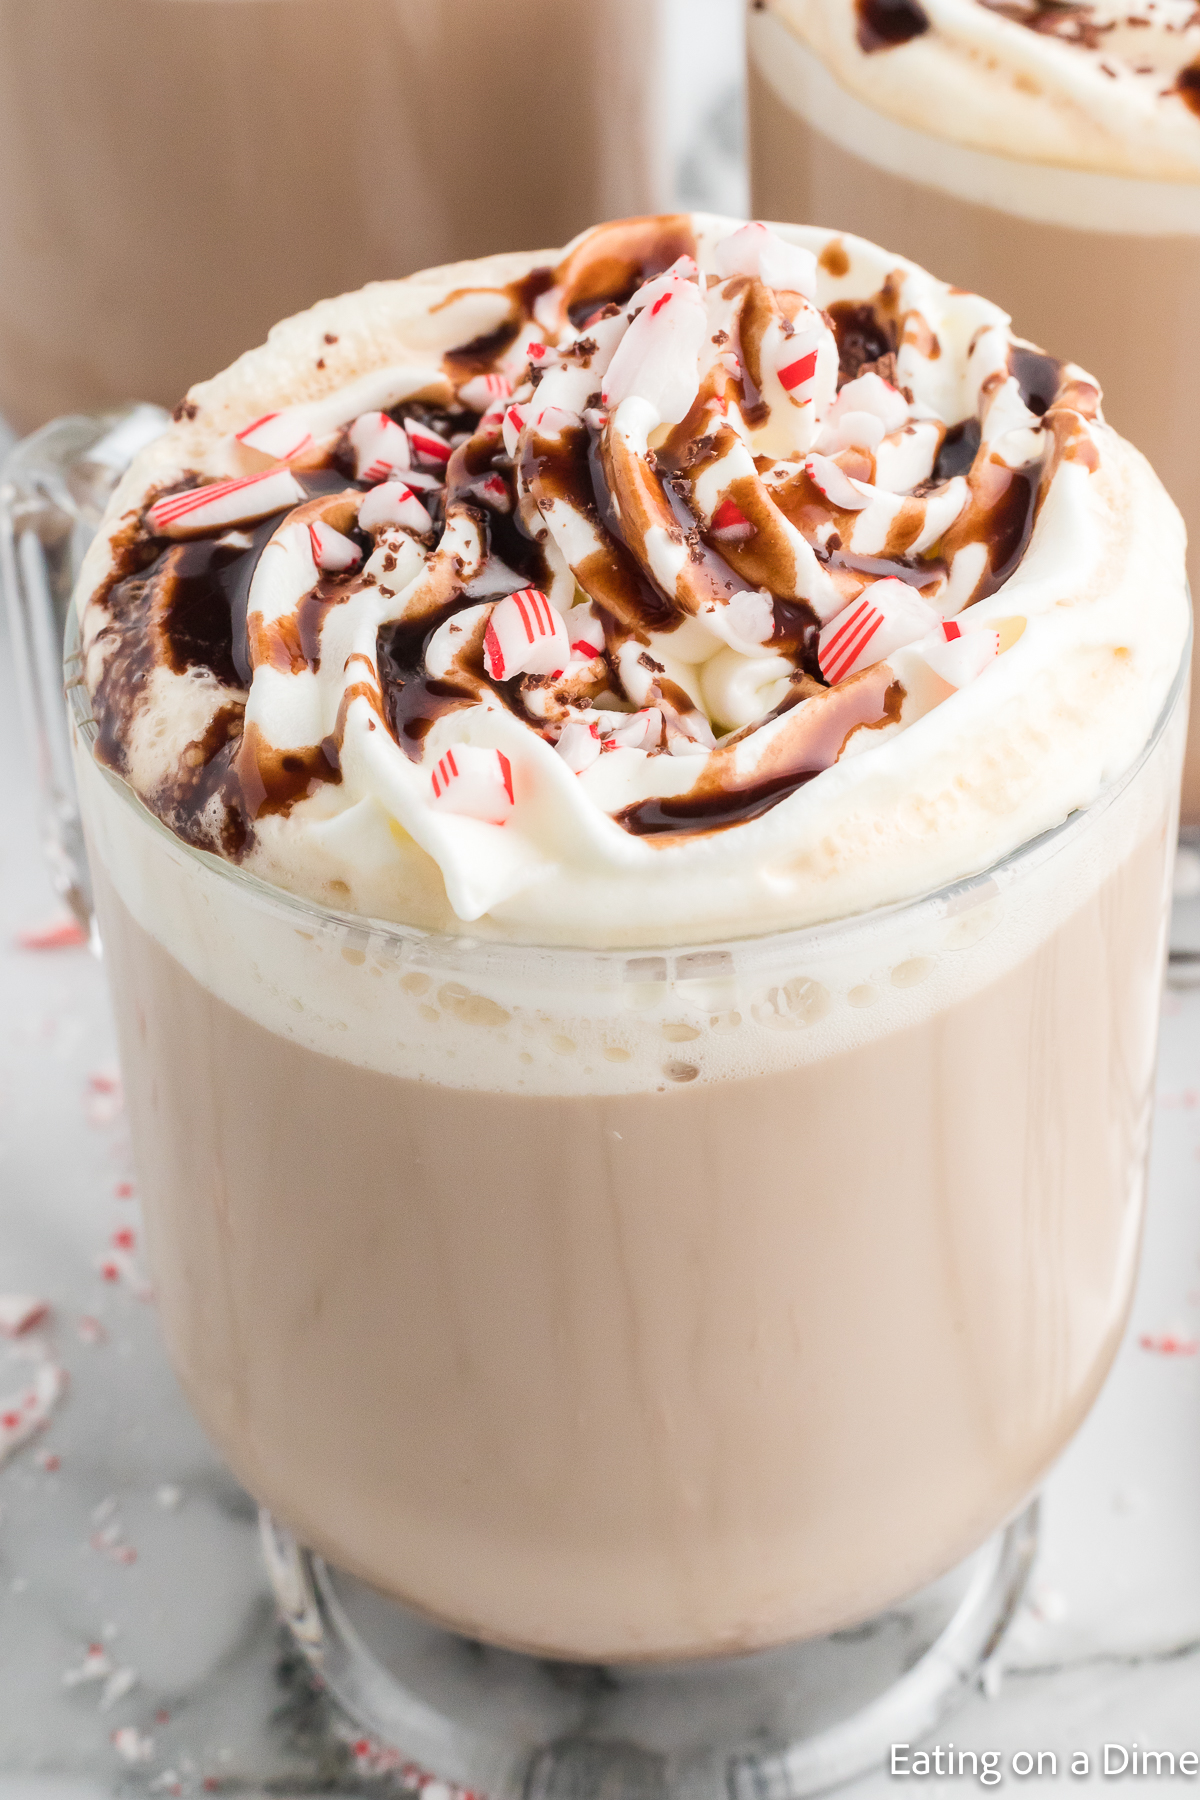 Need a holiday coffee drink recommendation? This is a peppermint mocha